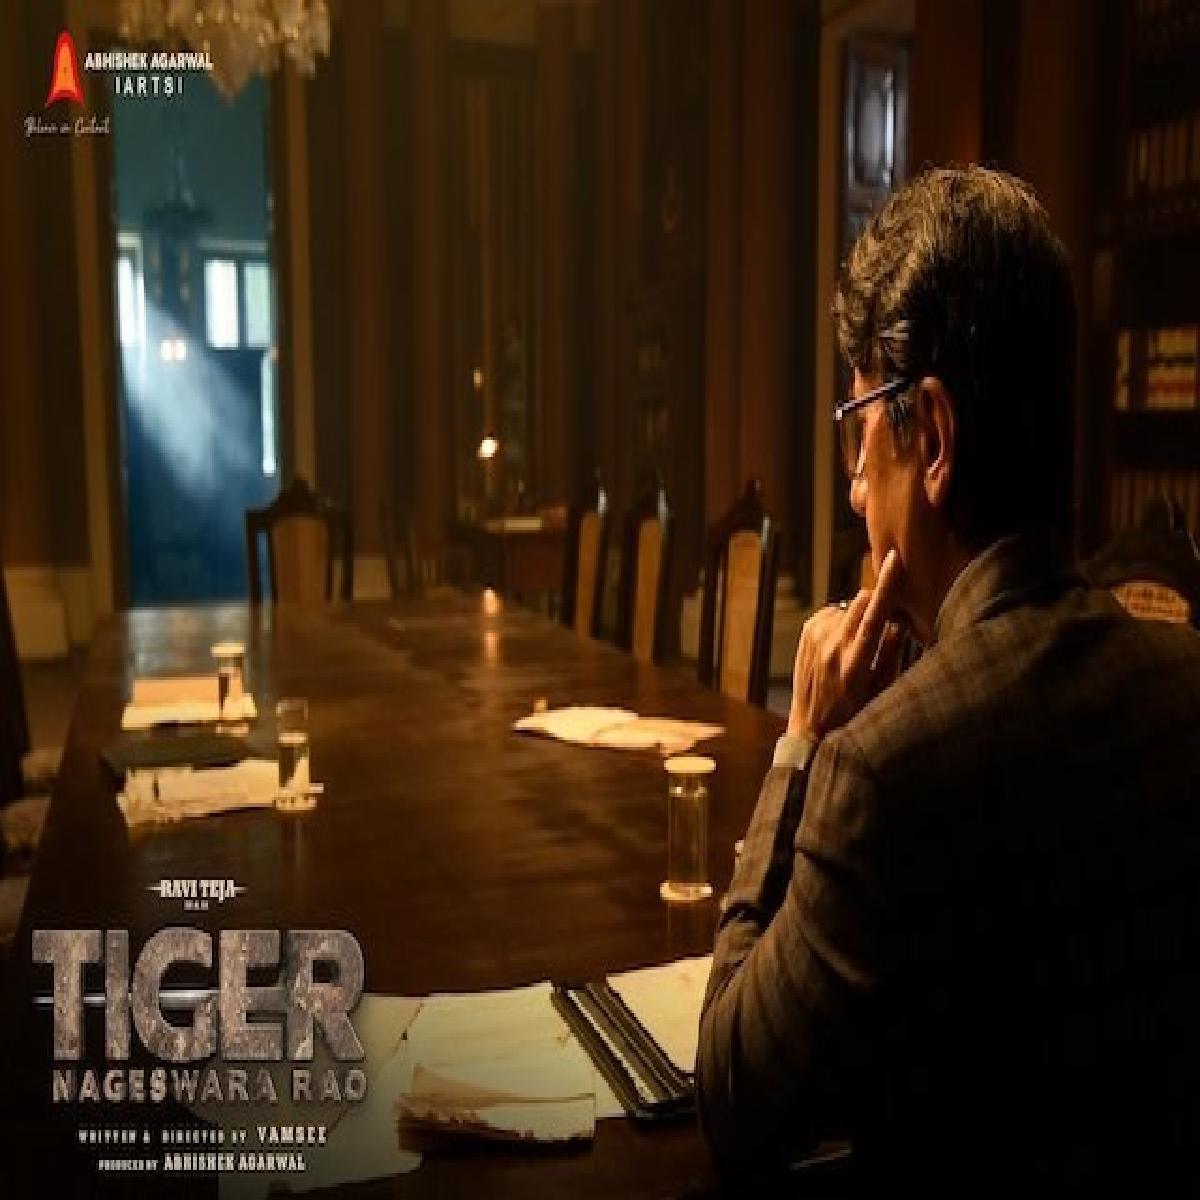 Anupam Kher Will Share Screen With Ravi Teja In Tiger Nageswara Rao